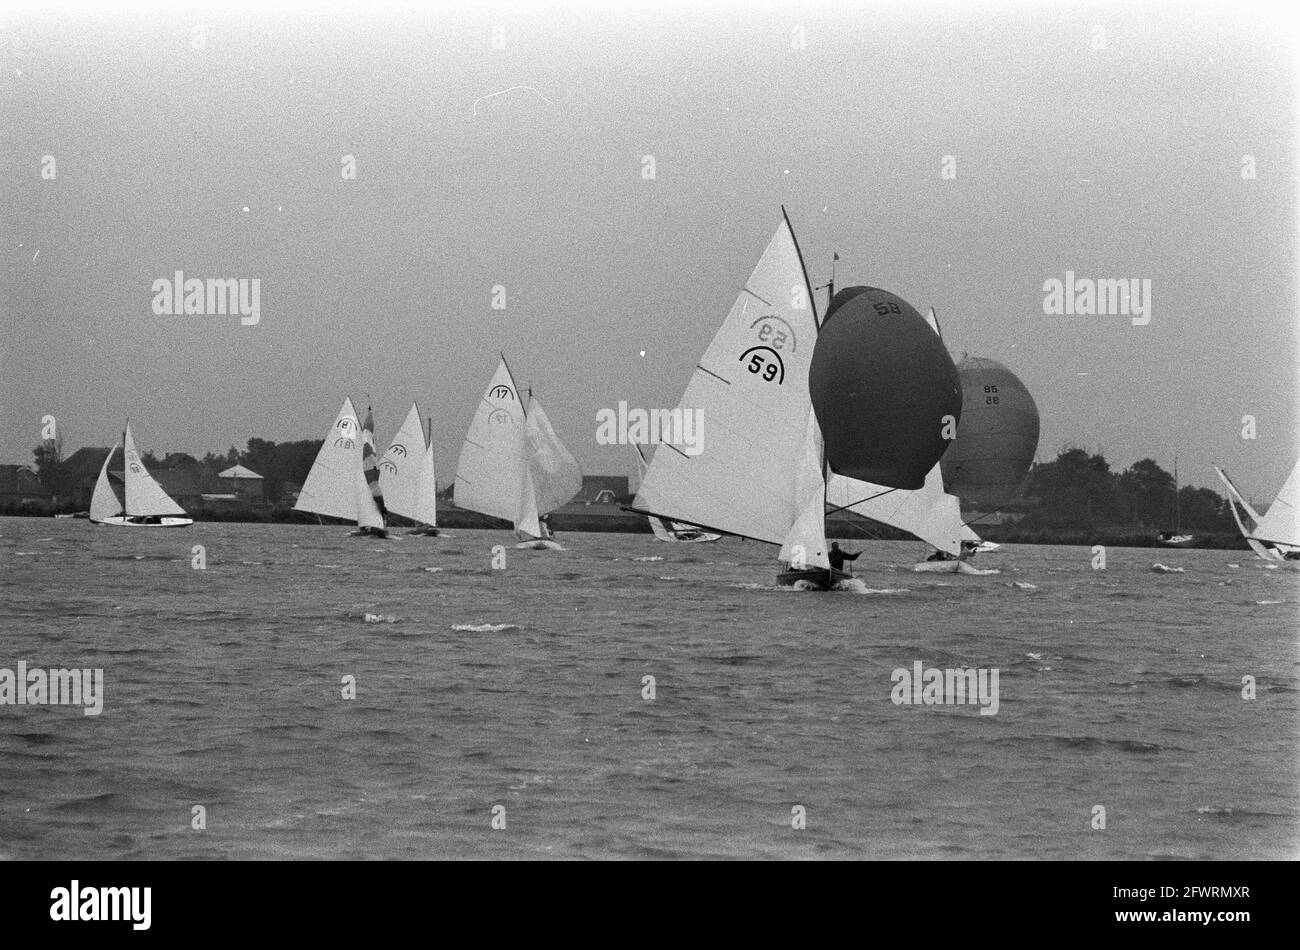 Dutch Championships Rainbow Class sailing on Alkmaardermeer, July 19th 1970, CHAMPIONSHIPS, SAGES, The Netherlands, 20th century press agency photo, news to remember, documentary, historic photography 1945-1990, visual stories, human history of the Twentieth Century, capturing moments in time Stock Photo